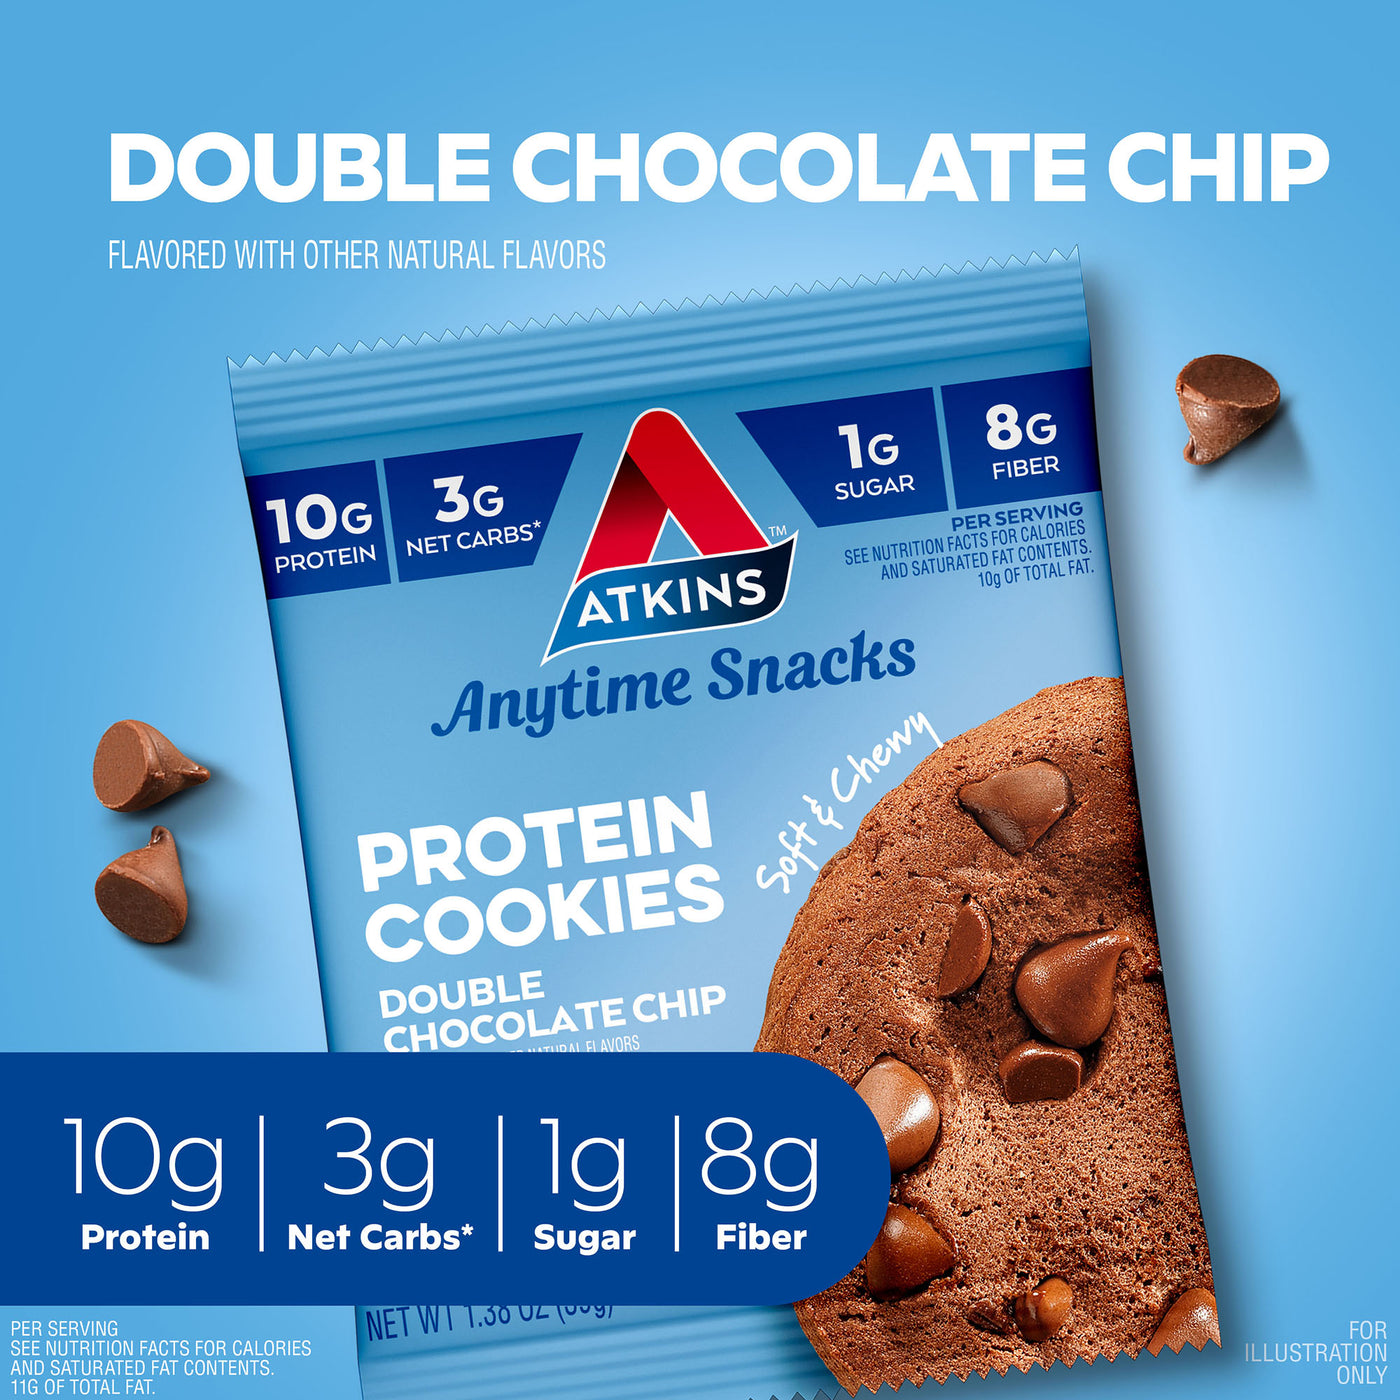 Double Chocolate Chip flavored with other natural flavors 10g protein, 3g net carbs*, 1g sugar, 8g fiber